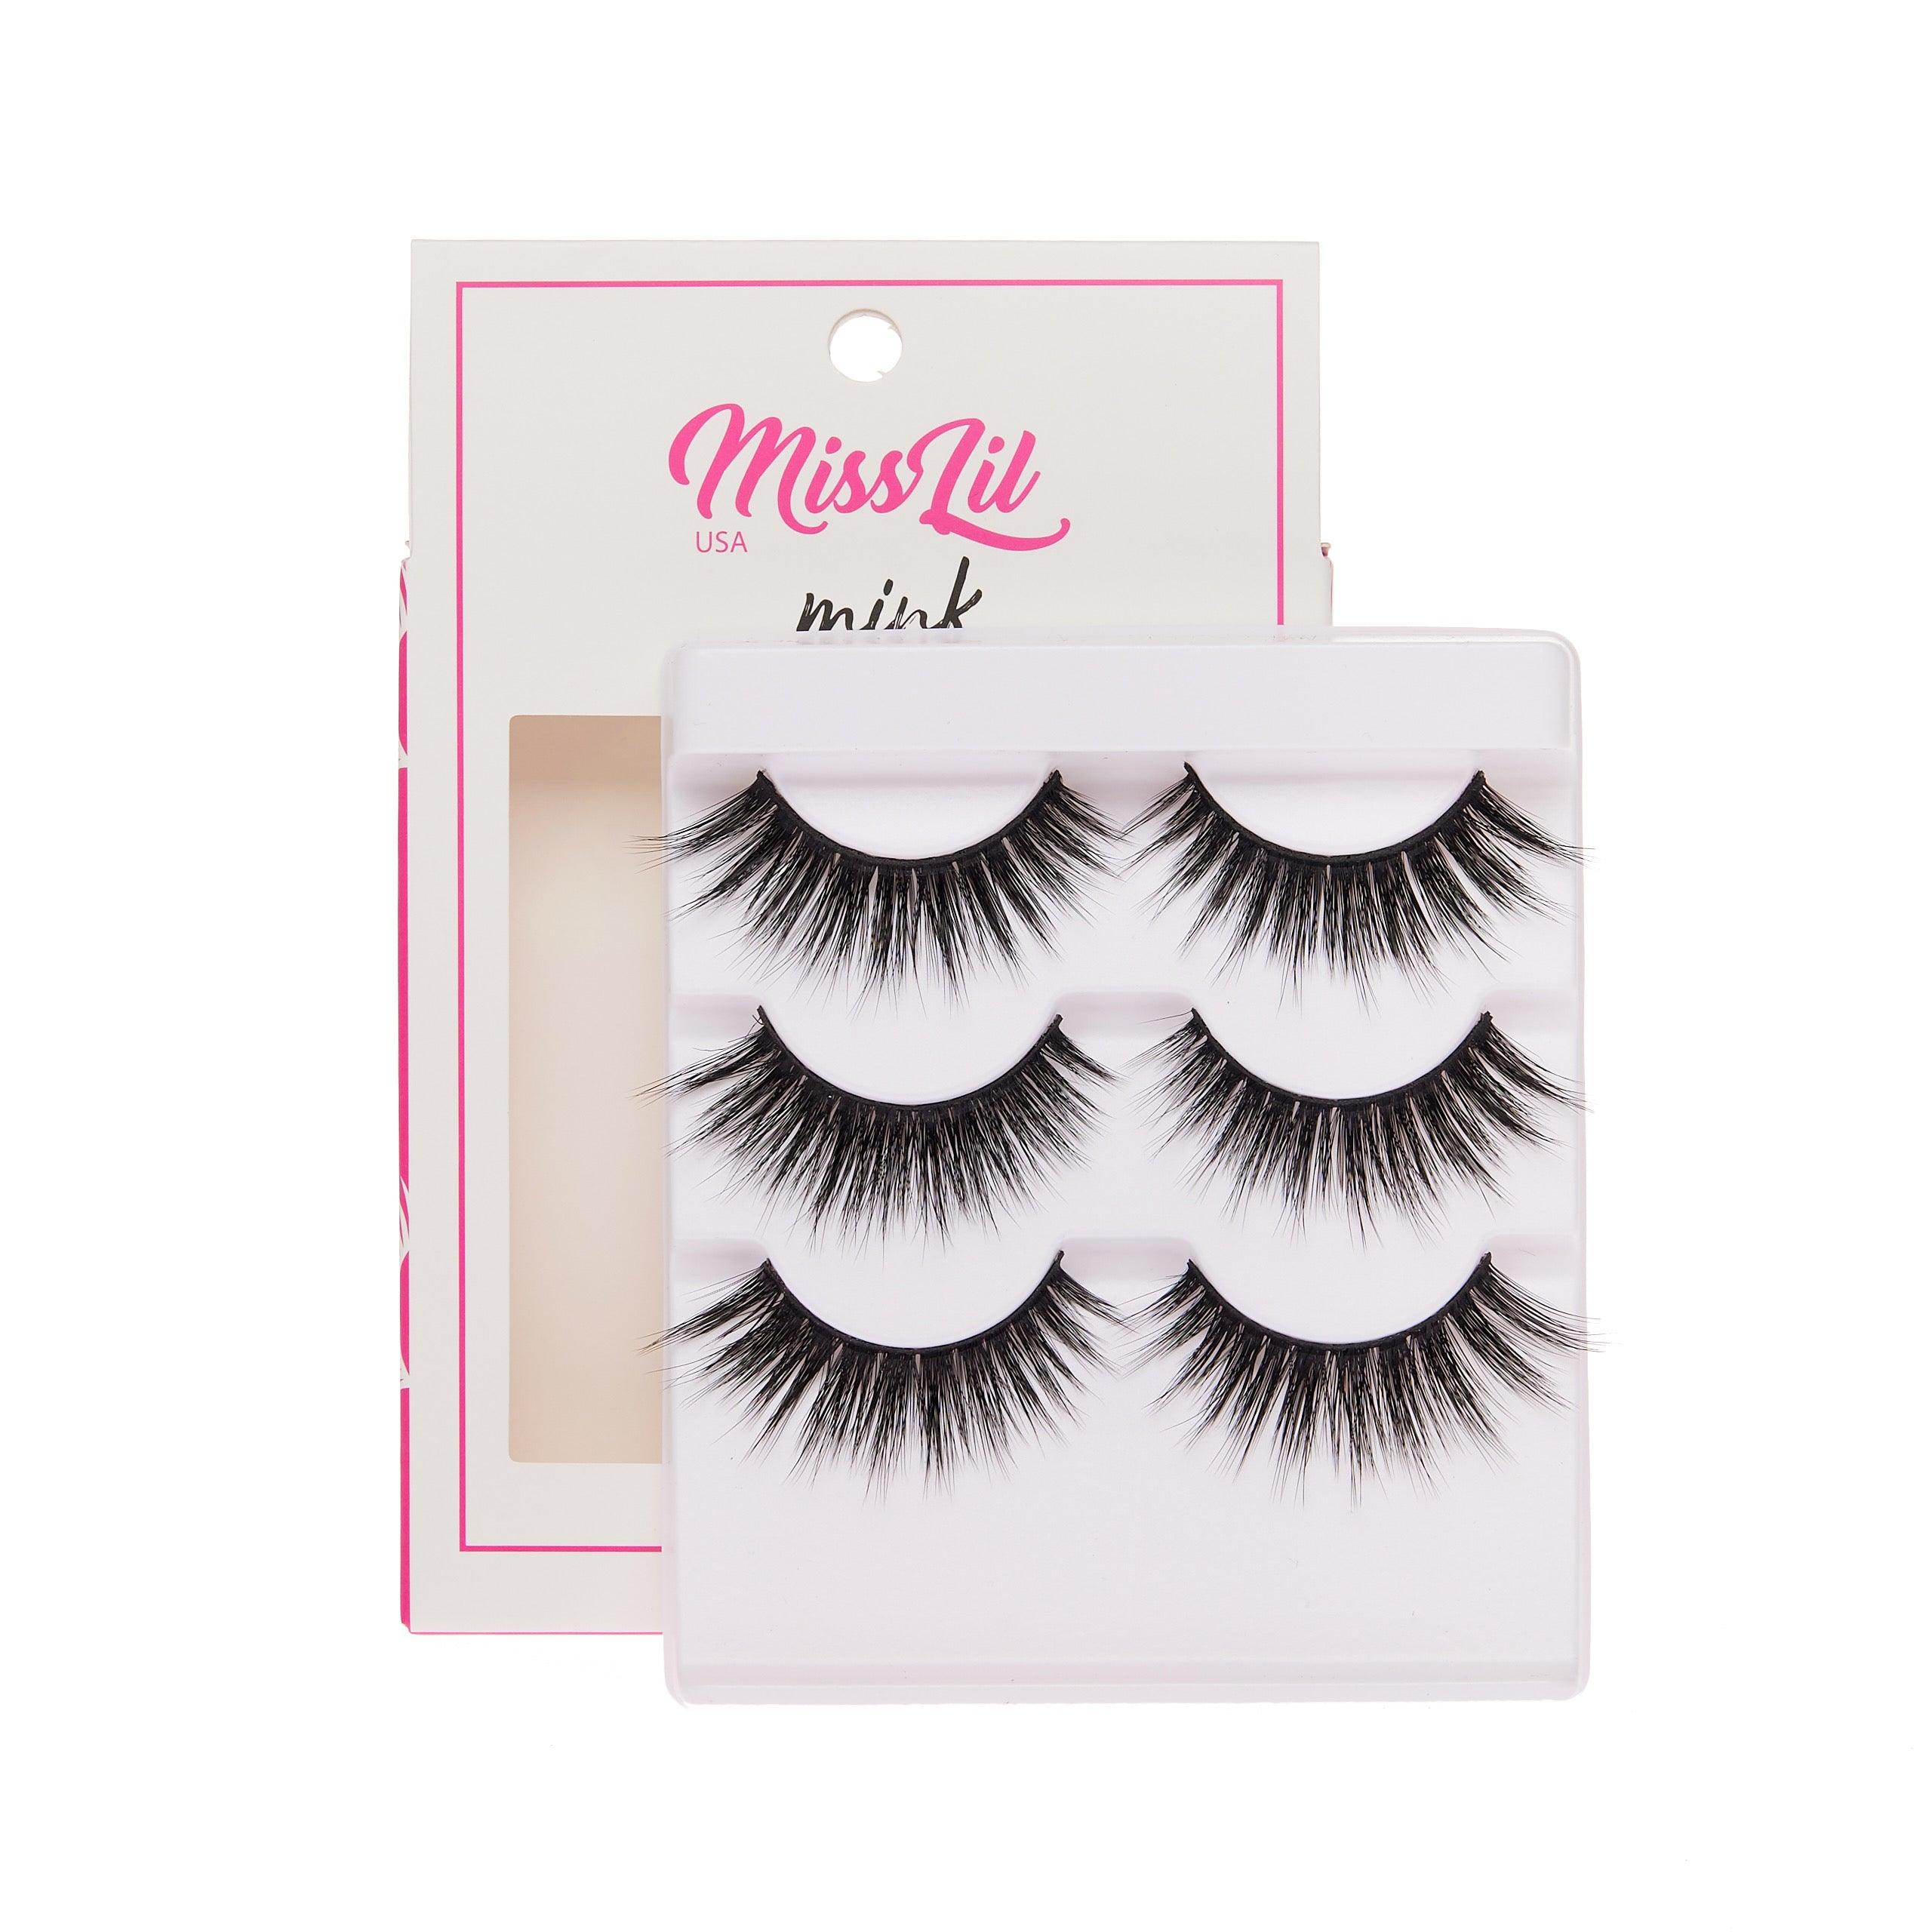 3-Pair Faux Mink Effect Eyelashes - Lash Party Collection #23 - Pack of 3 - Miss Lil USA